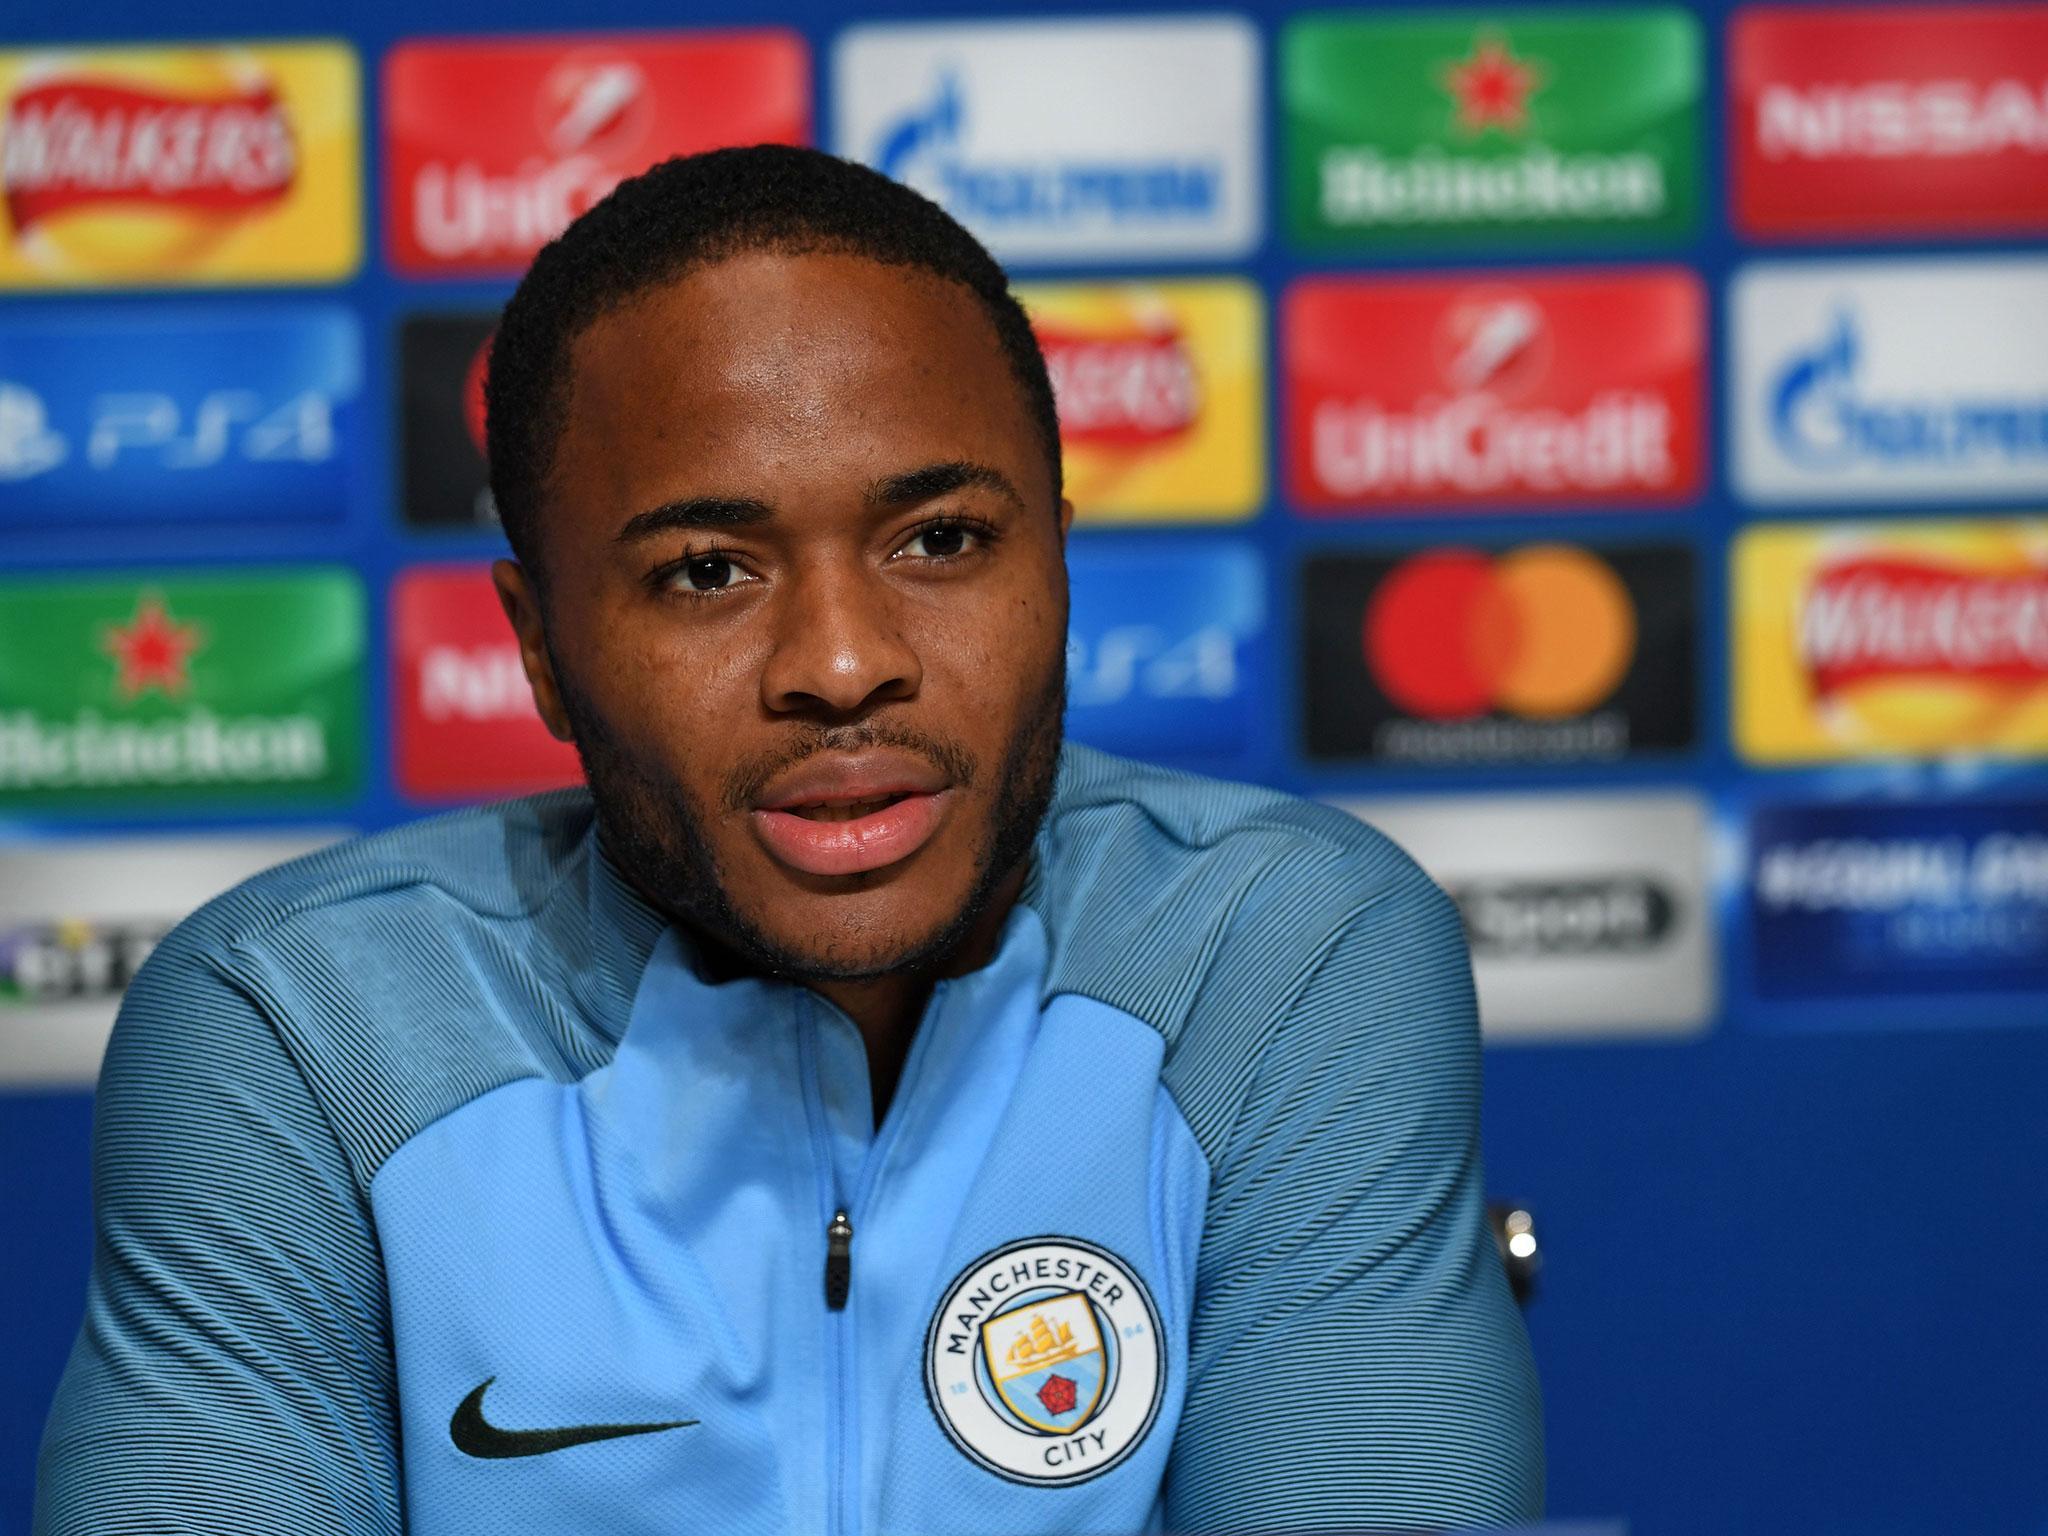 Raheem Sterling remains fully committed to Manchester City